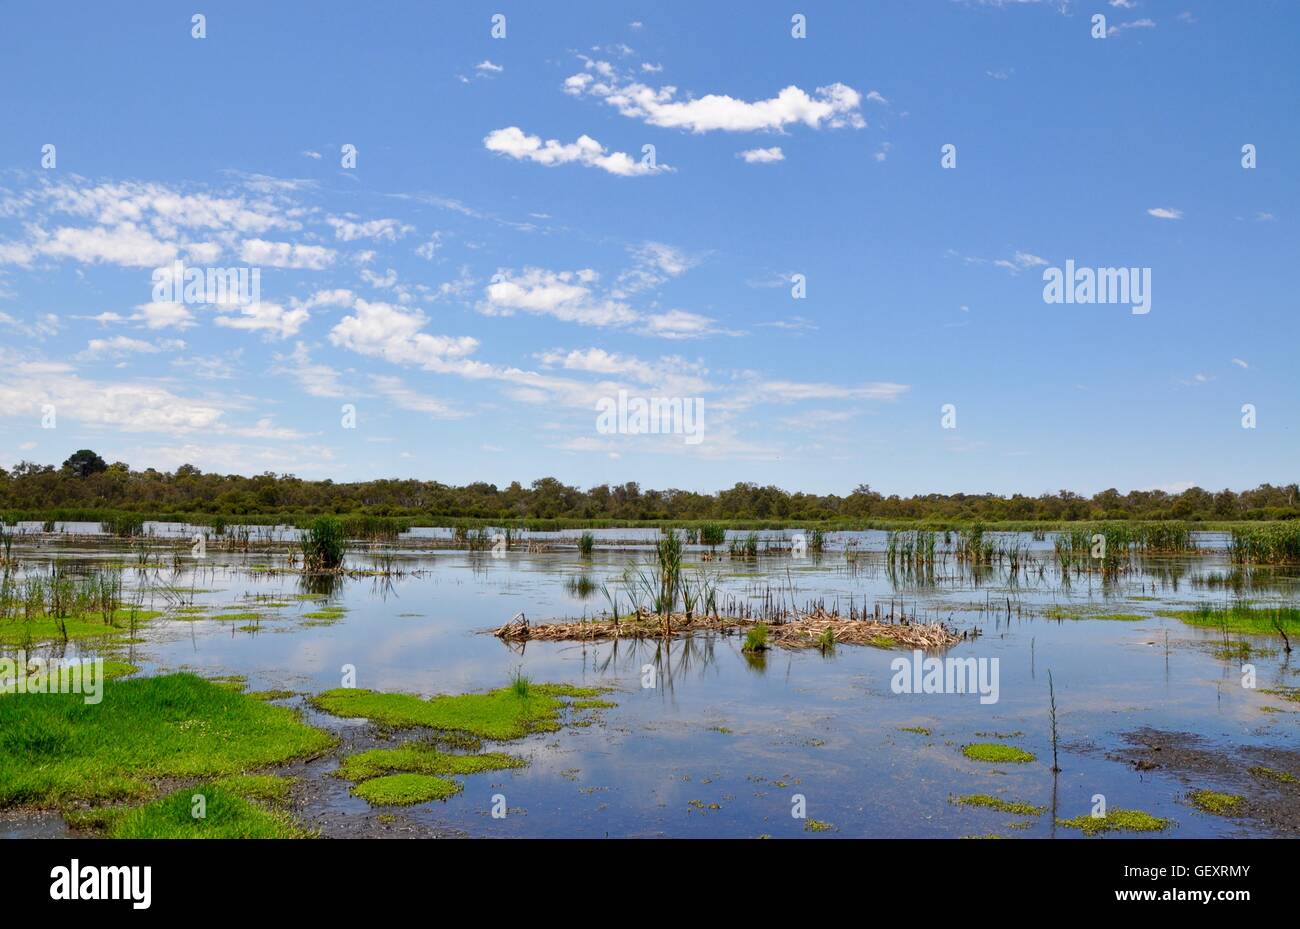 Reeds, mudflats and floating green vegetation in the Beelier Wetland landscape under a blue sky with clouds in Western Australia Stock Photo